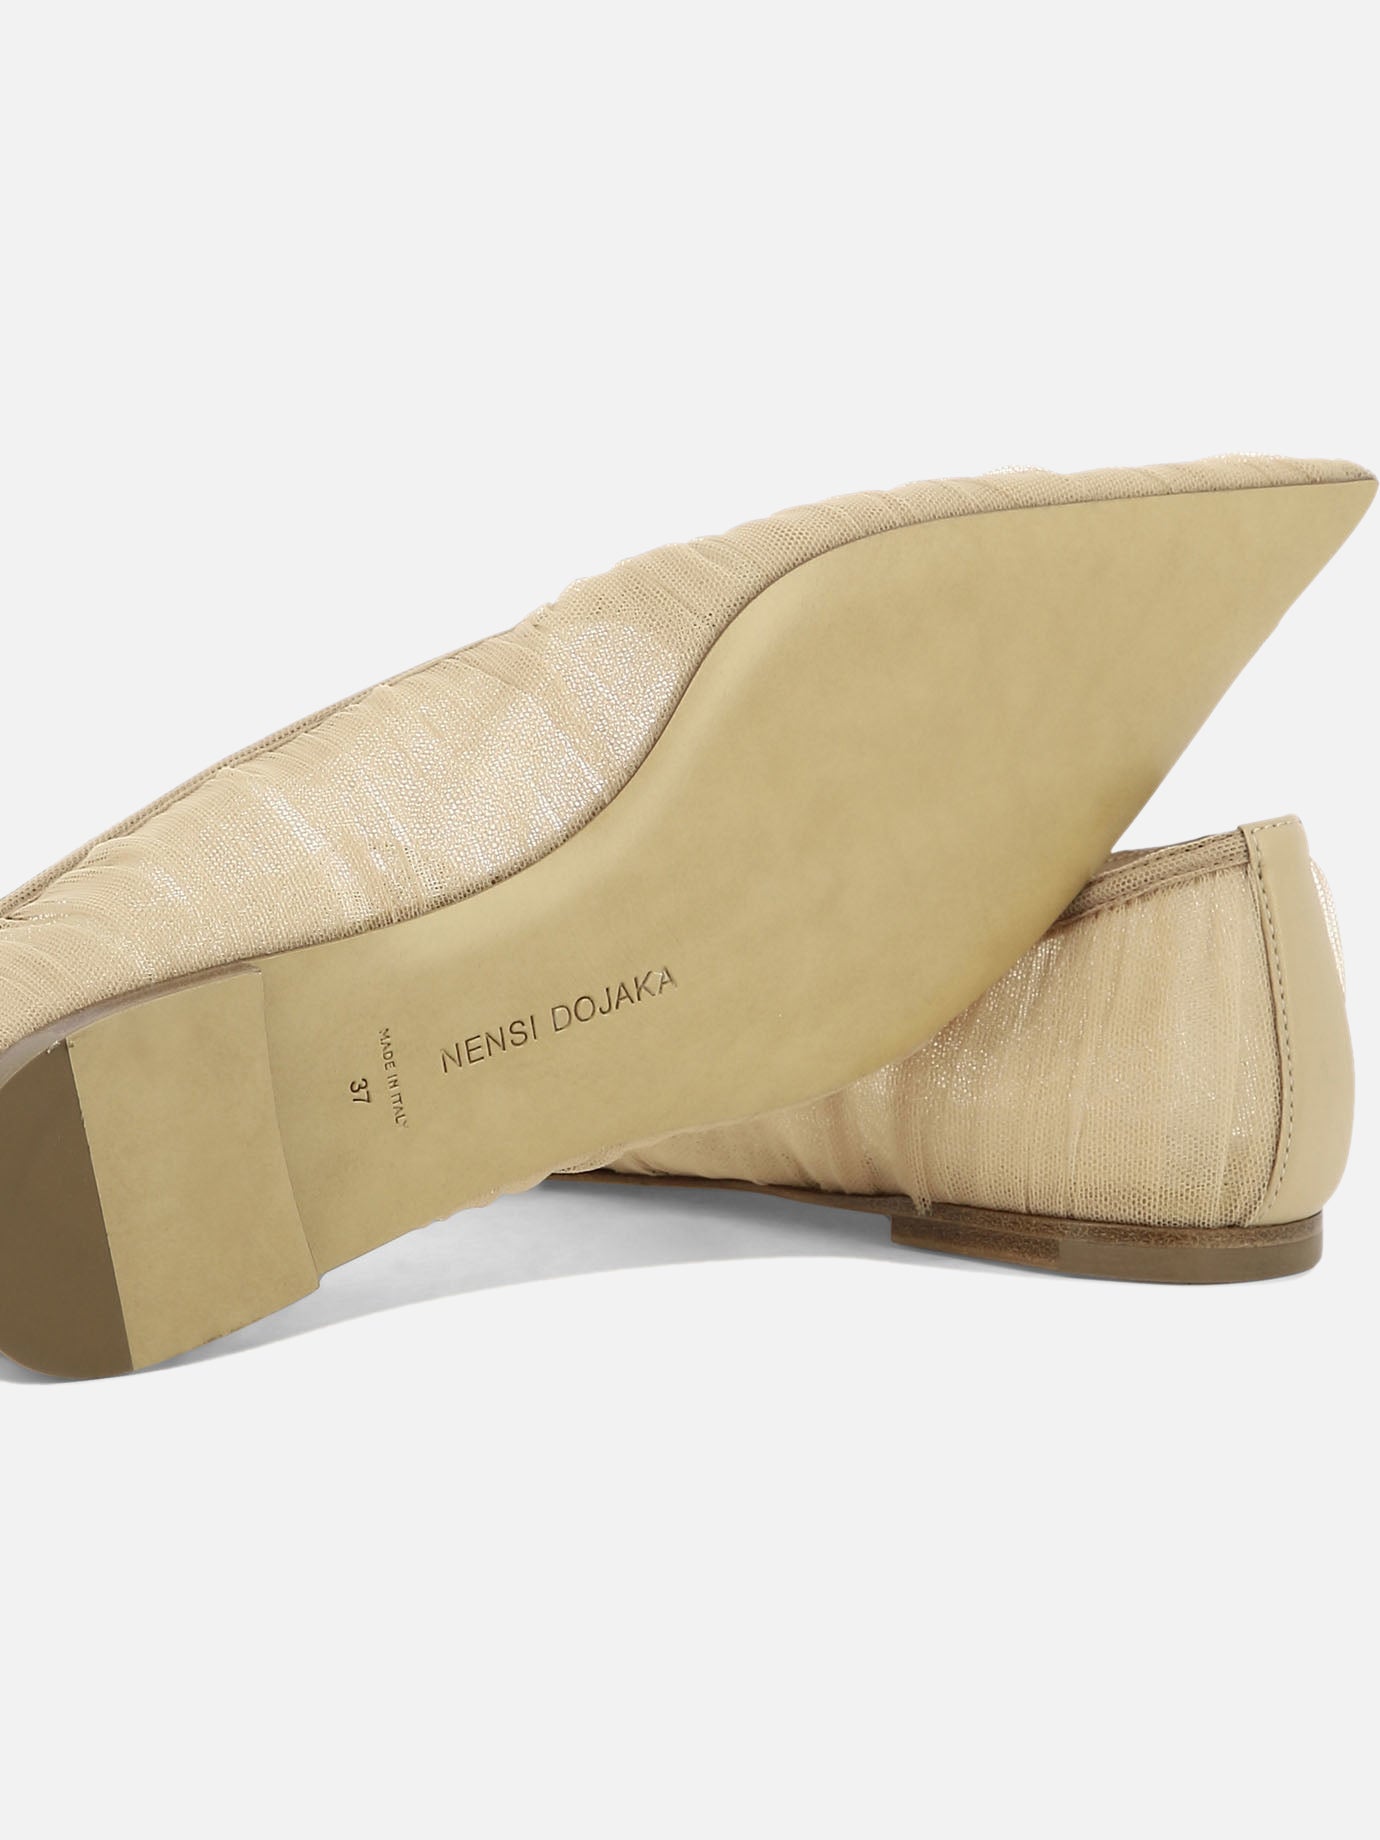 Pointed-toe ballet flats